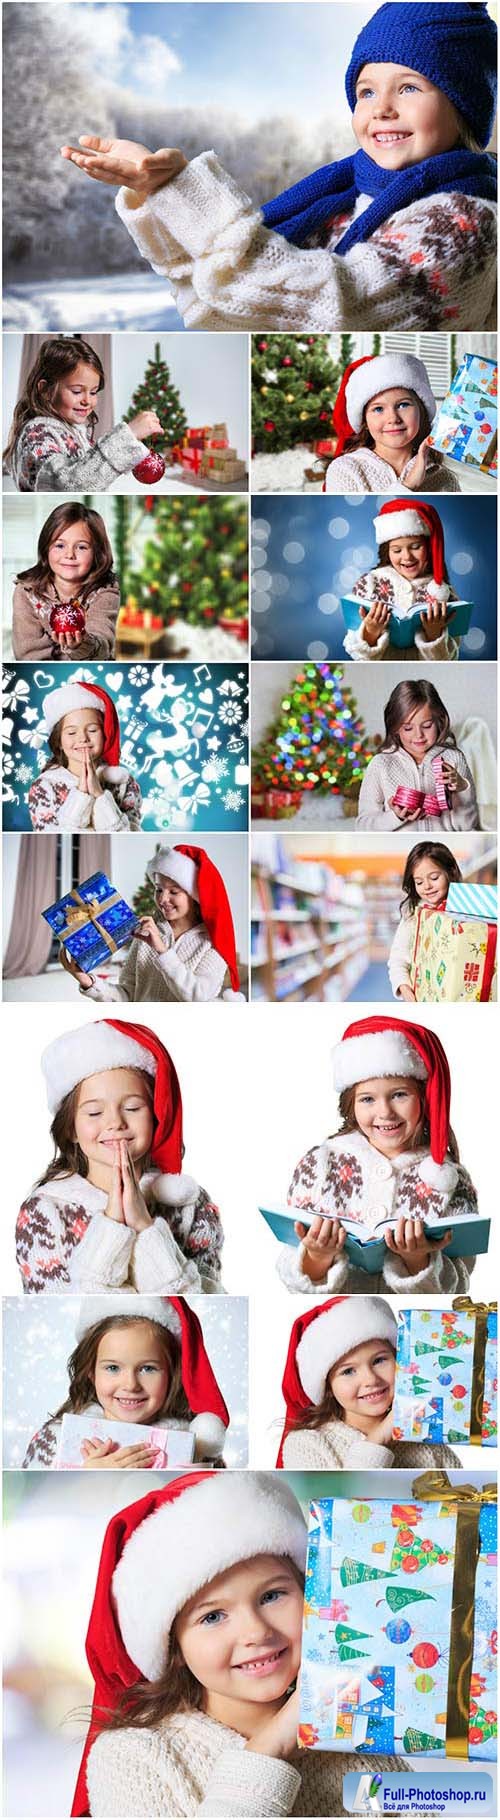 New Year and Christmas stock photos 84